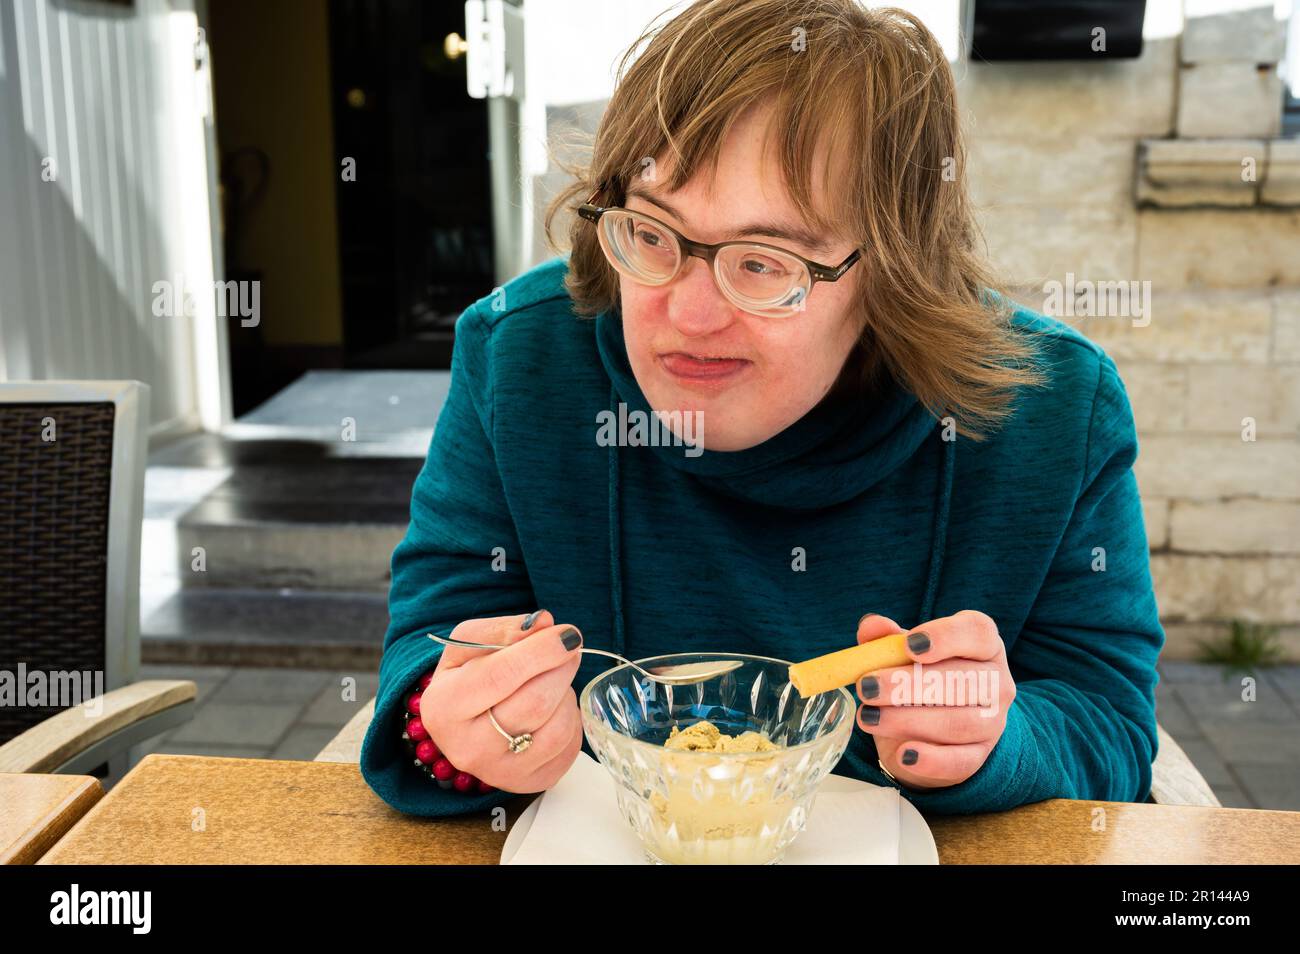 Portrait of a happy 40 yo woman with Down Syndrome eating an ice cream, Tienen, belgium Stock Photo